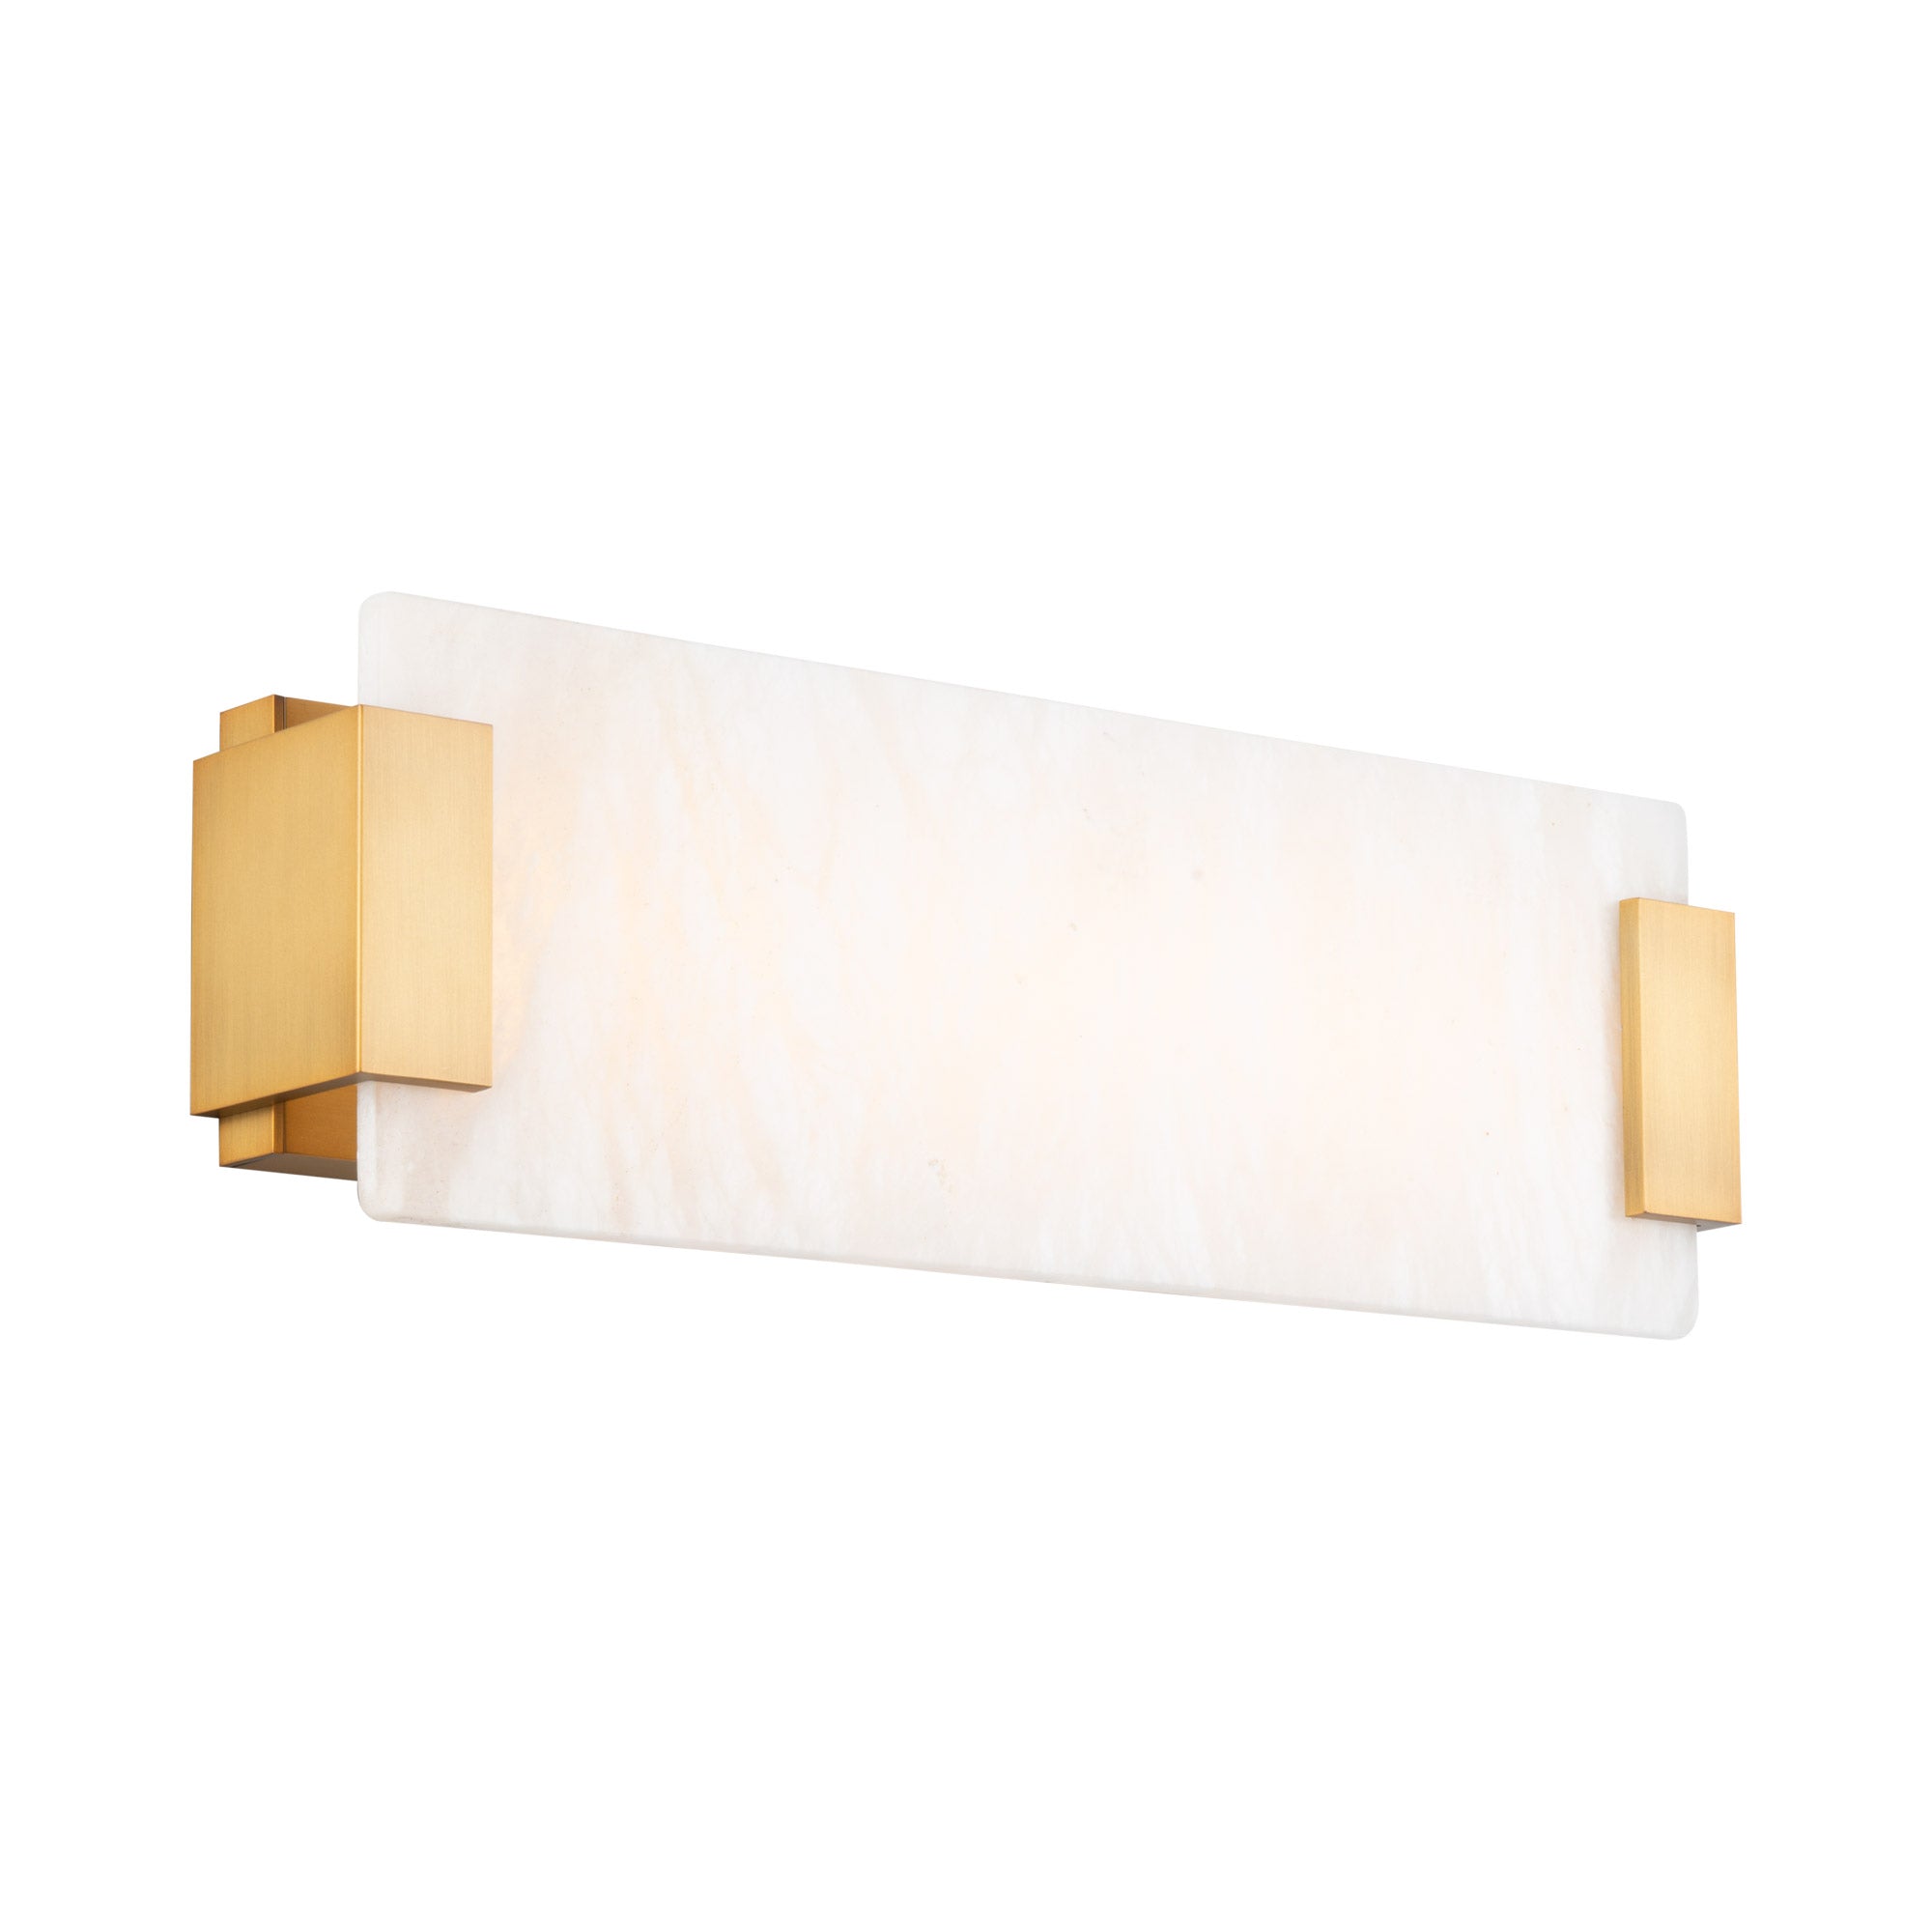 QUARRY Bathroom sconce Gold INTEGRATED LED - WS-60018-AB | MODERN FORMS